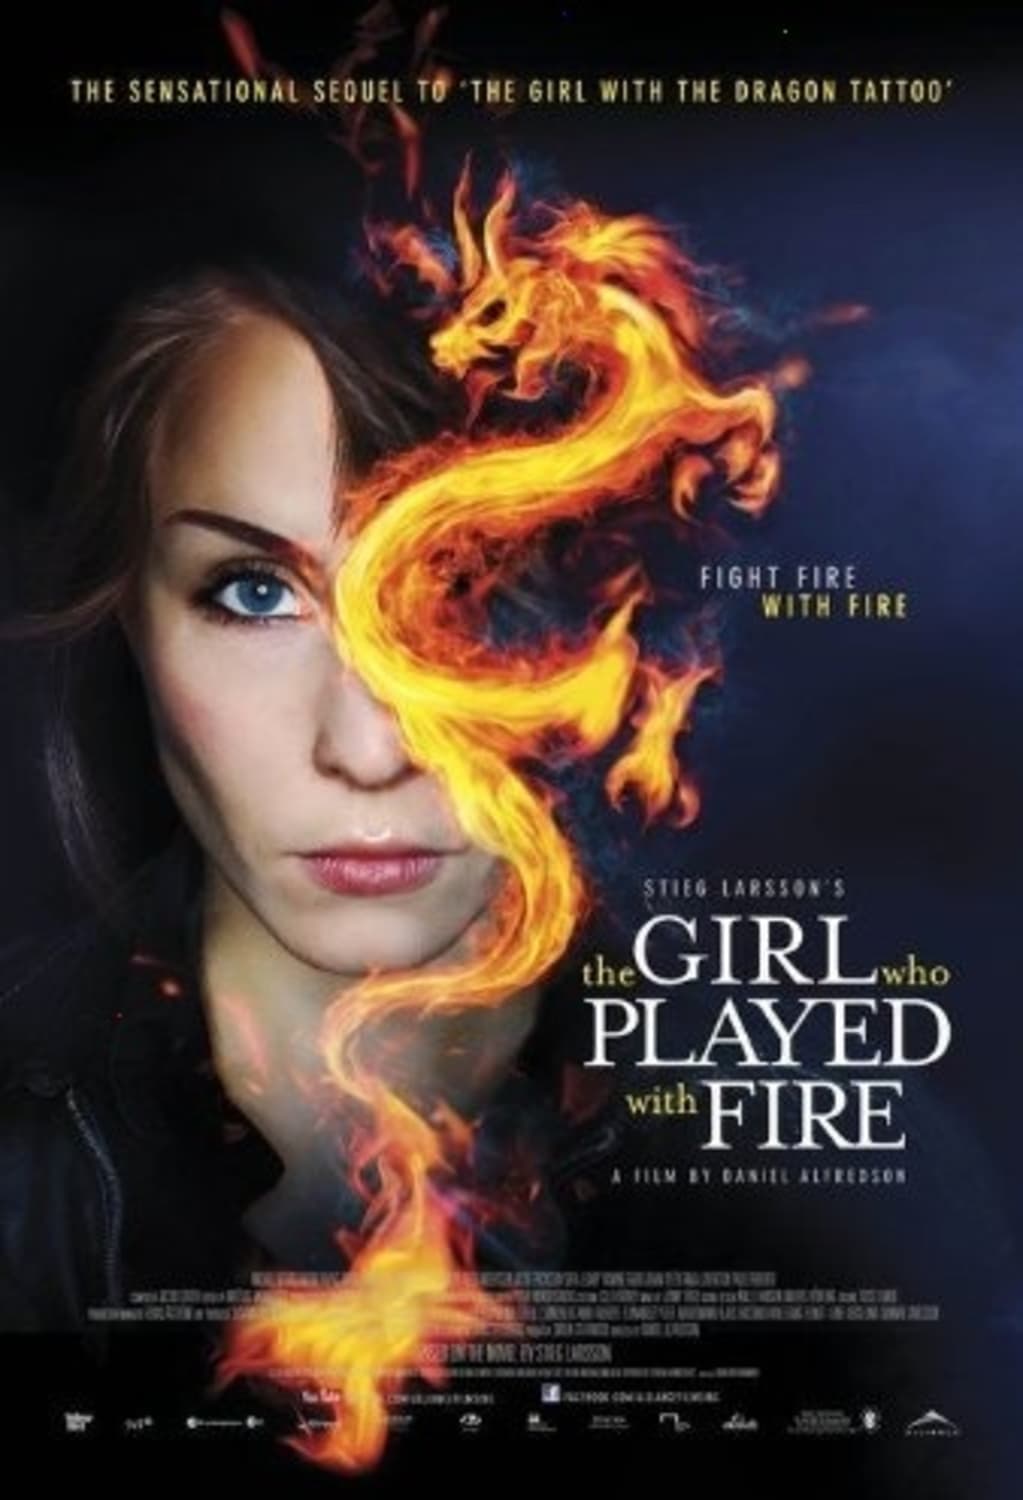 The Girl Who Played with Fire (DVD) on MovieShack